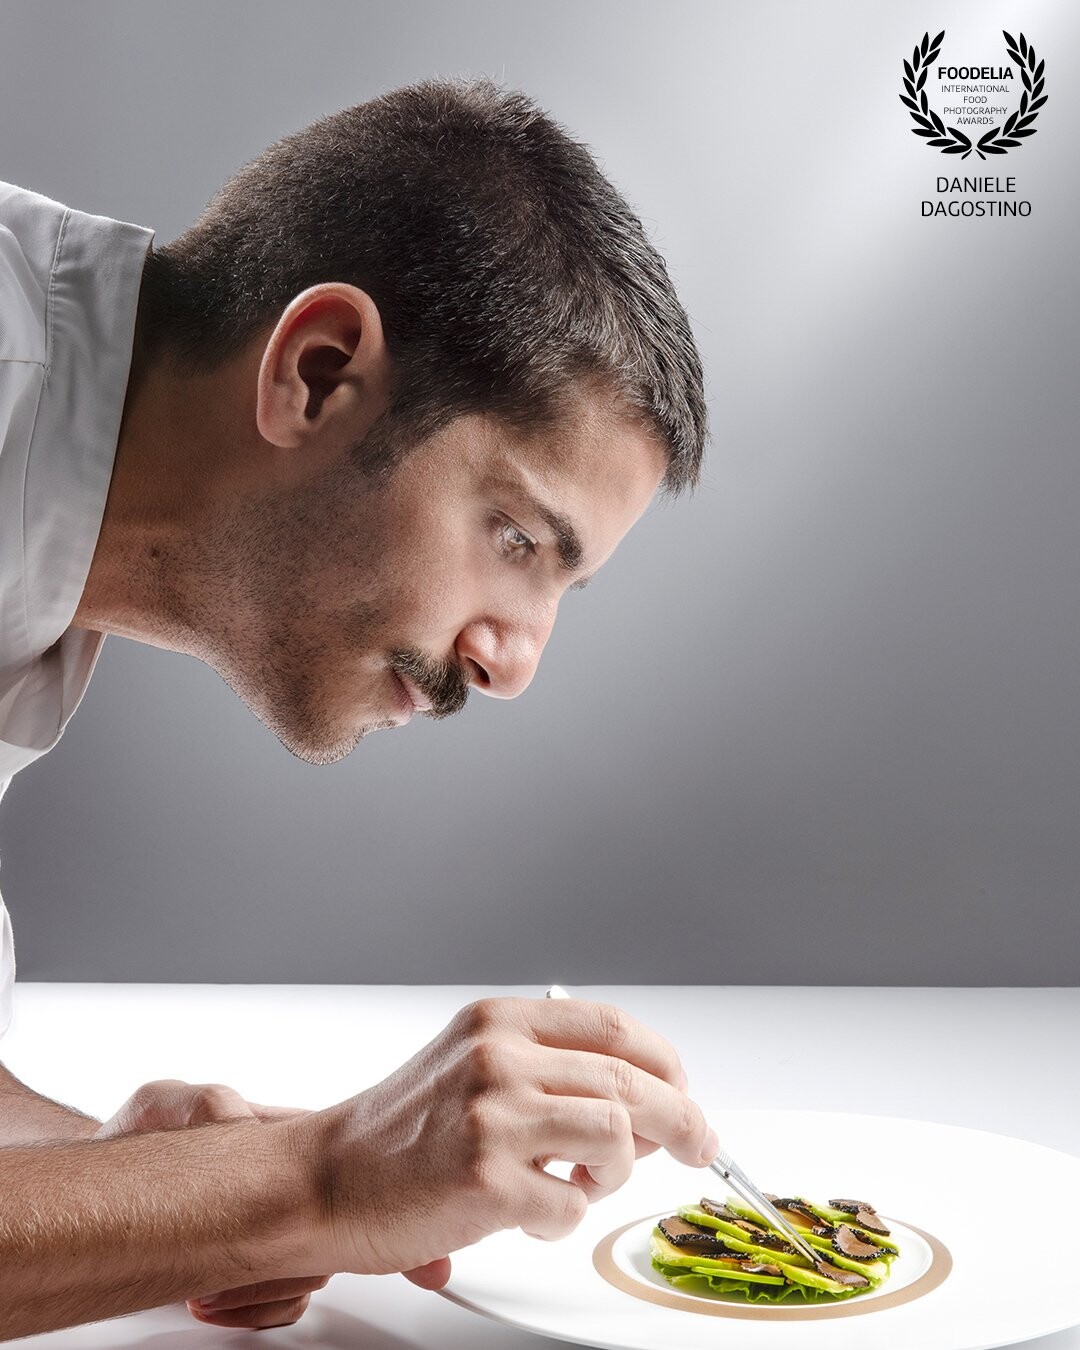 Chefs are like artists but they "paint" flavors for the palate.<br />
The starred Italian chef "Ciro Scamardella" while preparing one of his minimal recipes.